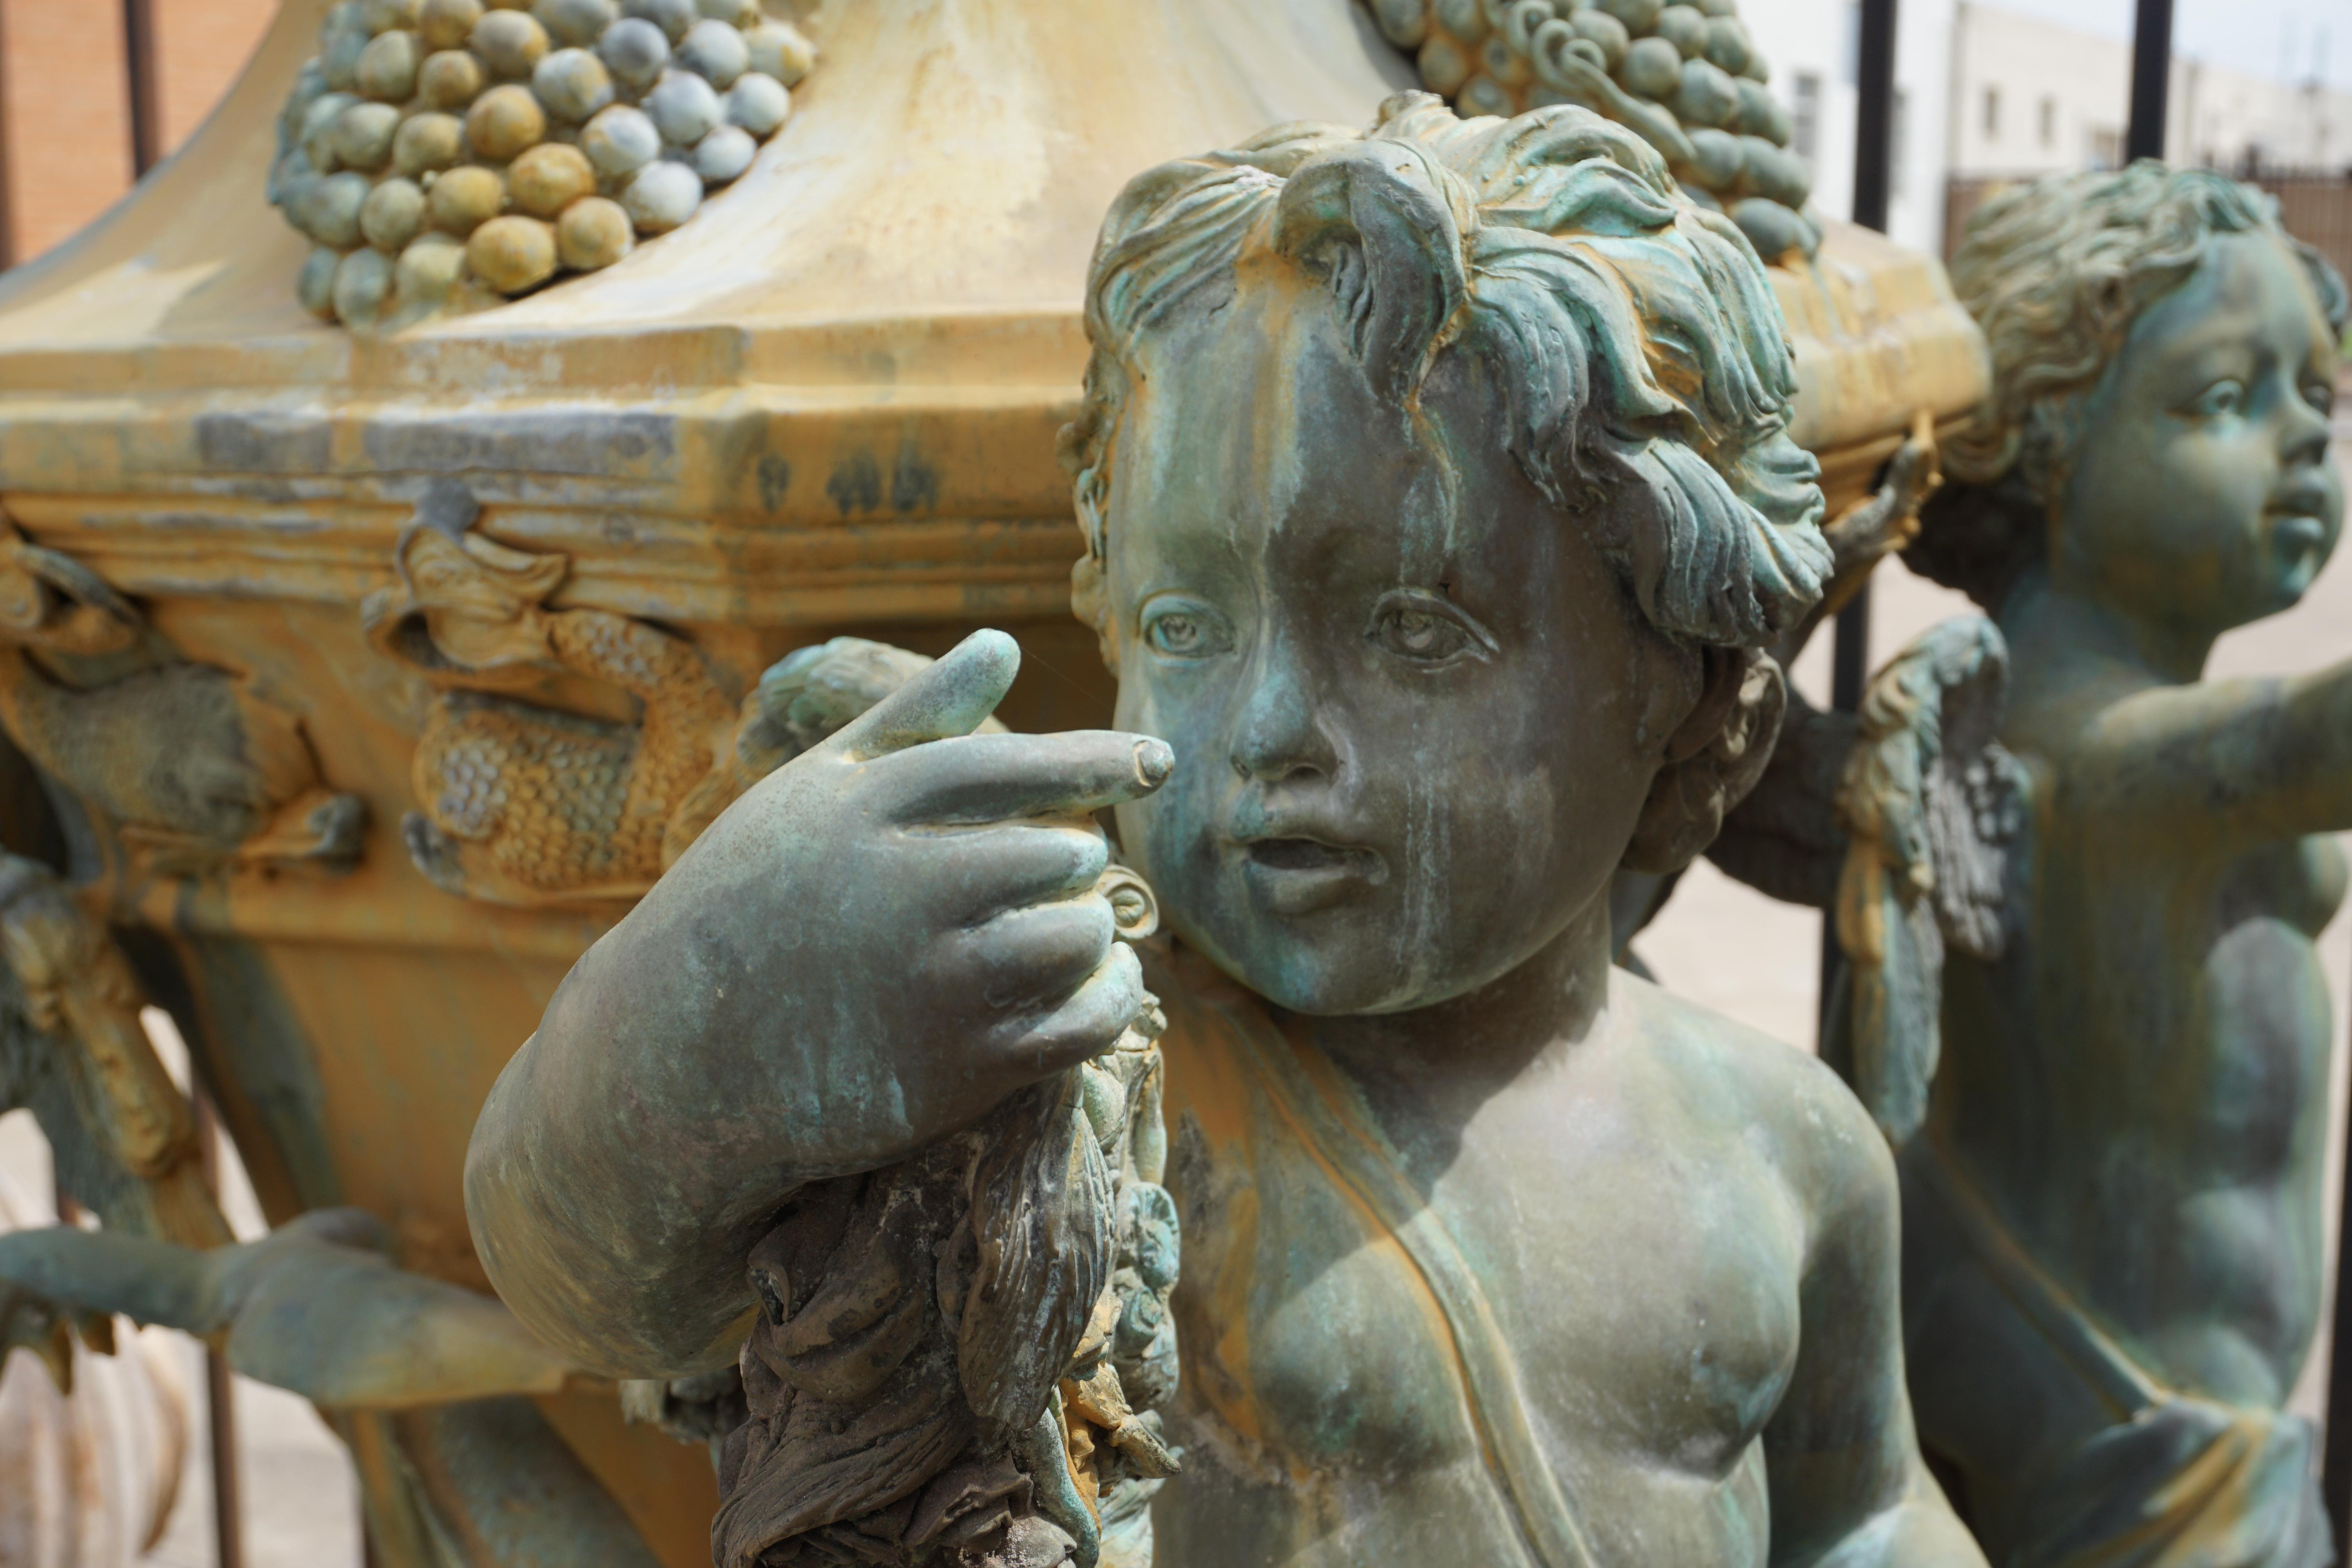 This fountain is hand carved bronze and originates from France, circa the early 1900s. Previously owned by a prominent Dallas family.